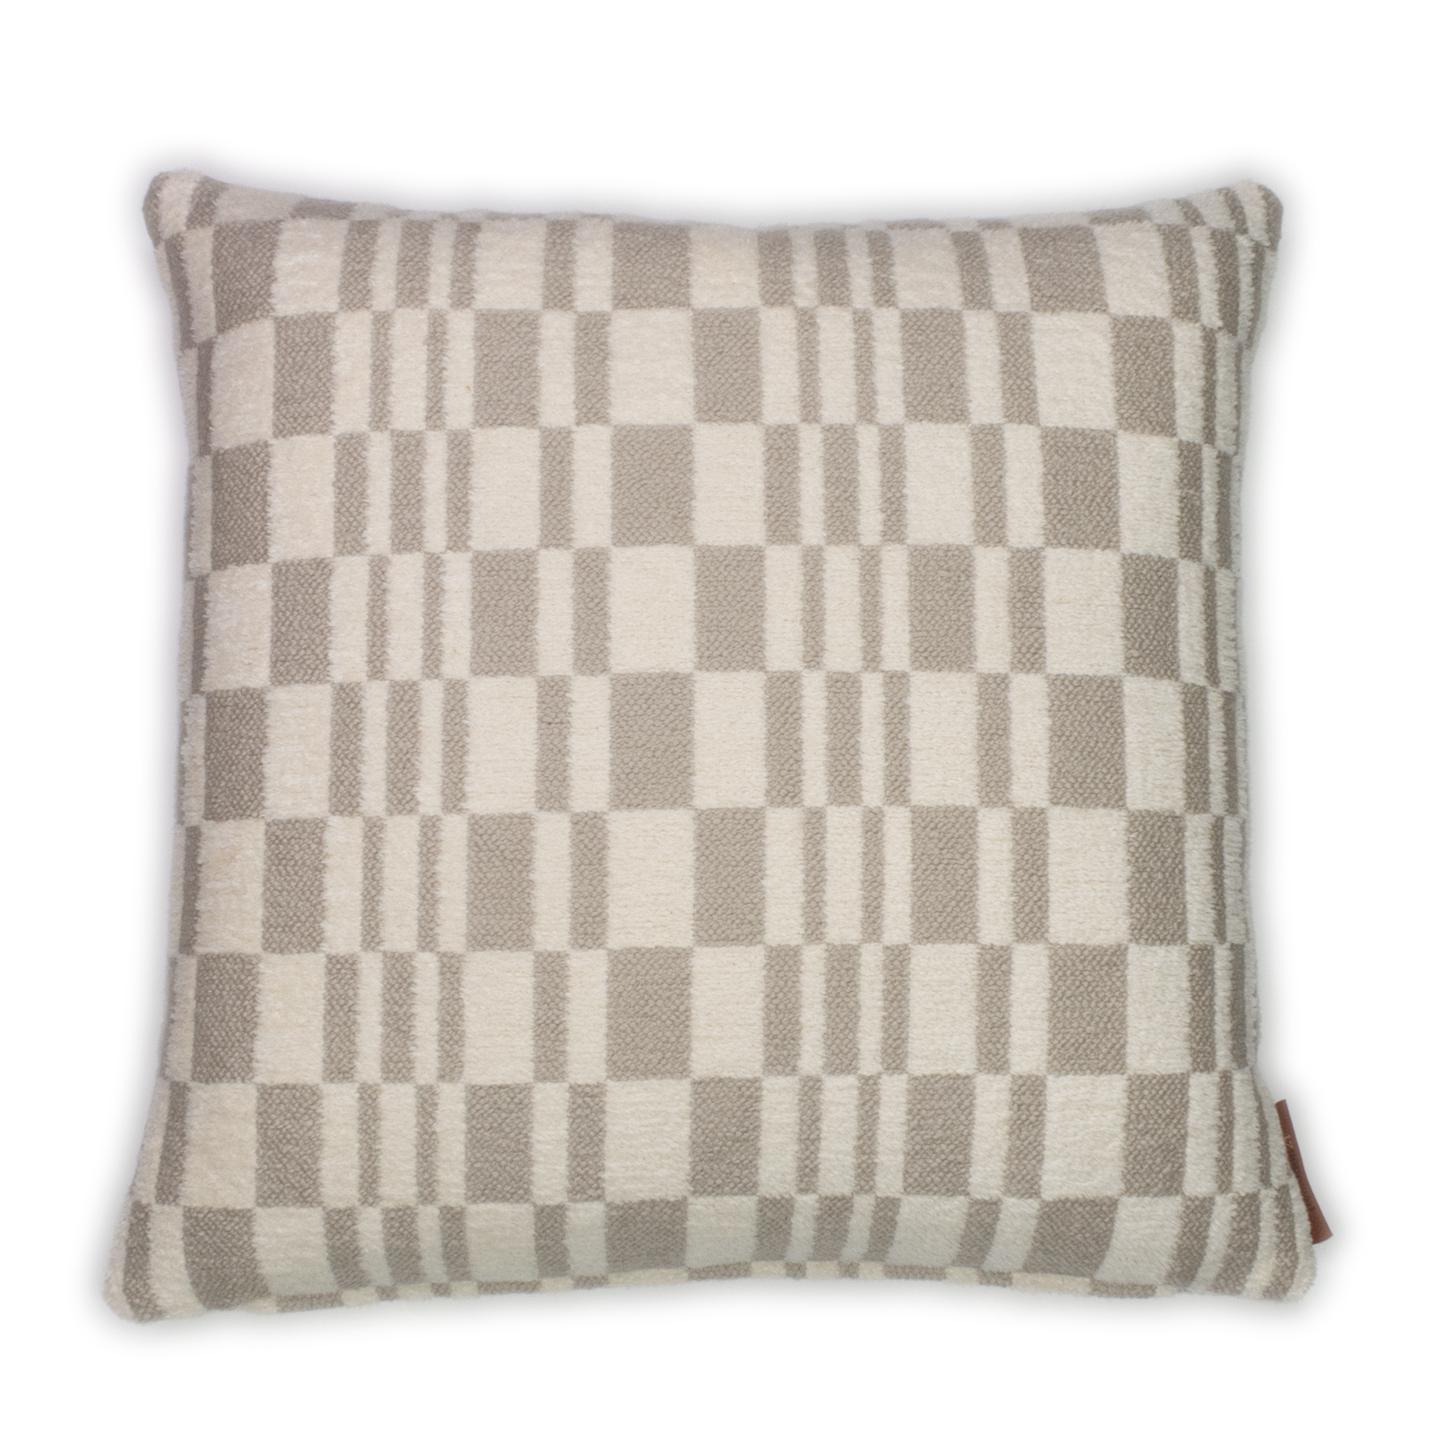 Modern Cushion / Pillow Chess Linen by Evolution21 For Sale